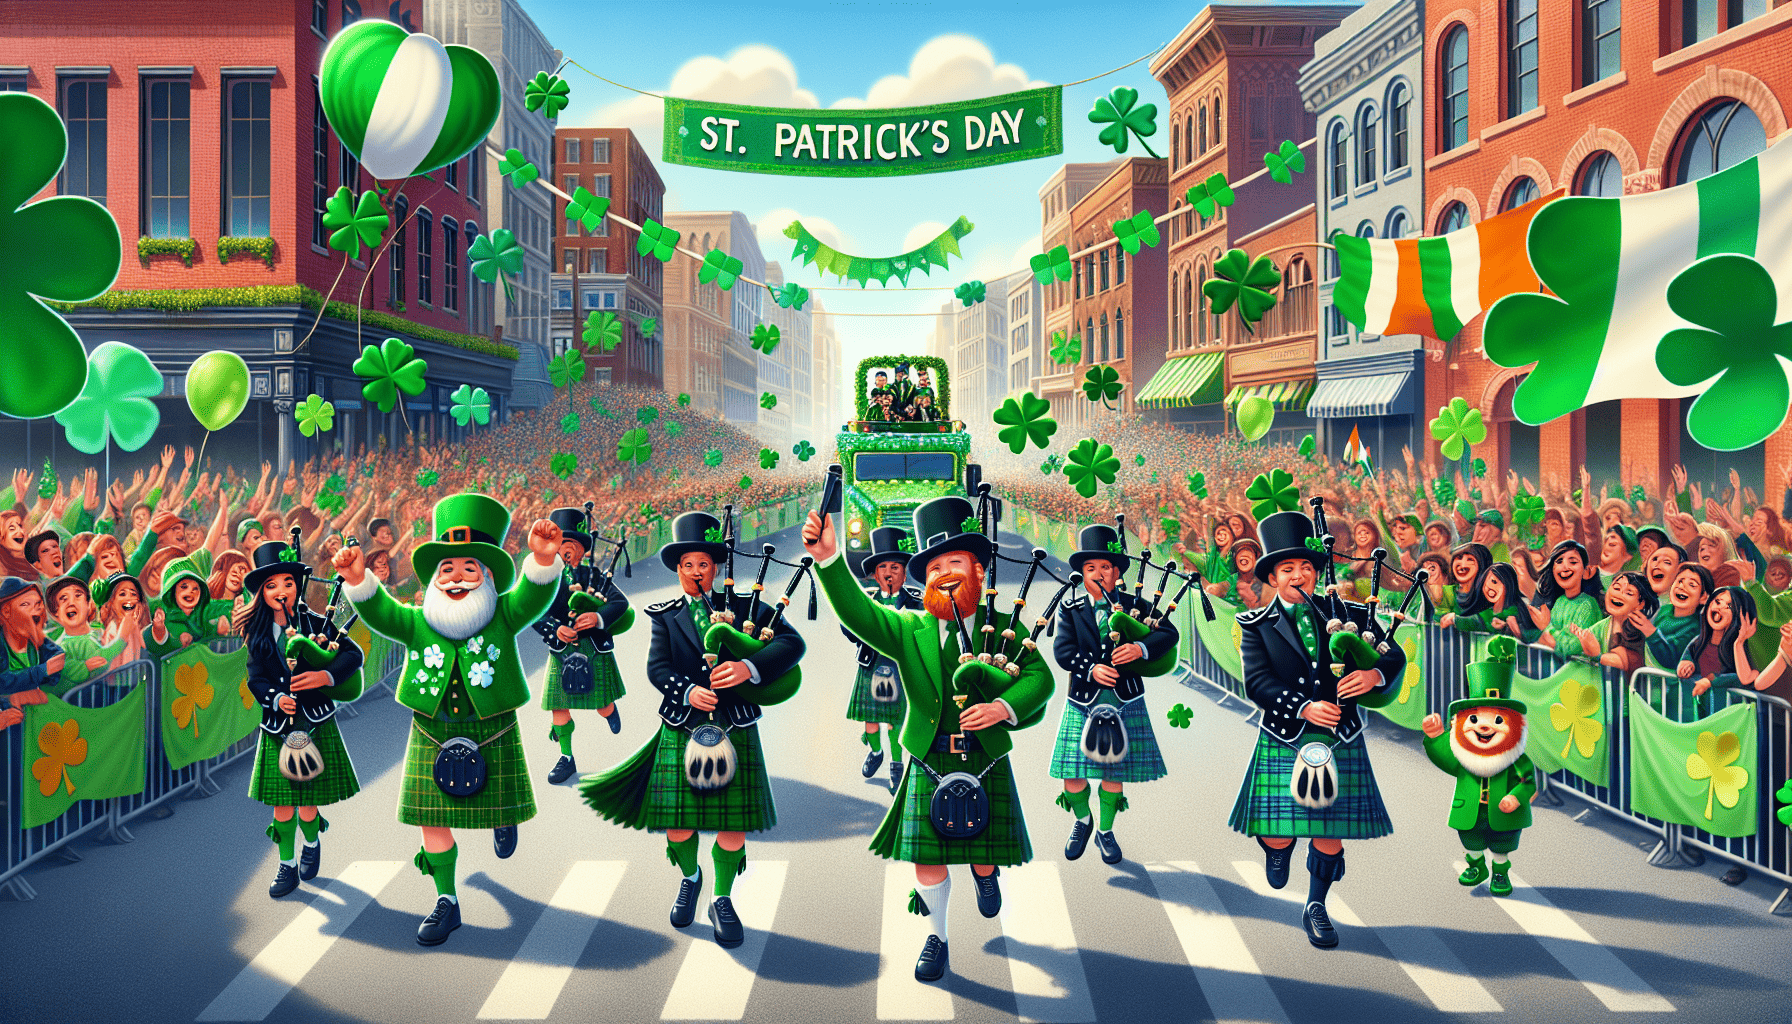 Illustration of a St. Patrick's Day parade with colorful floats